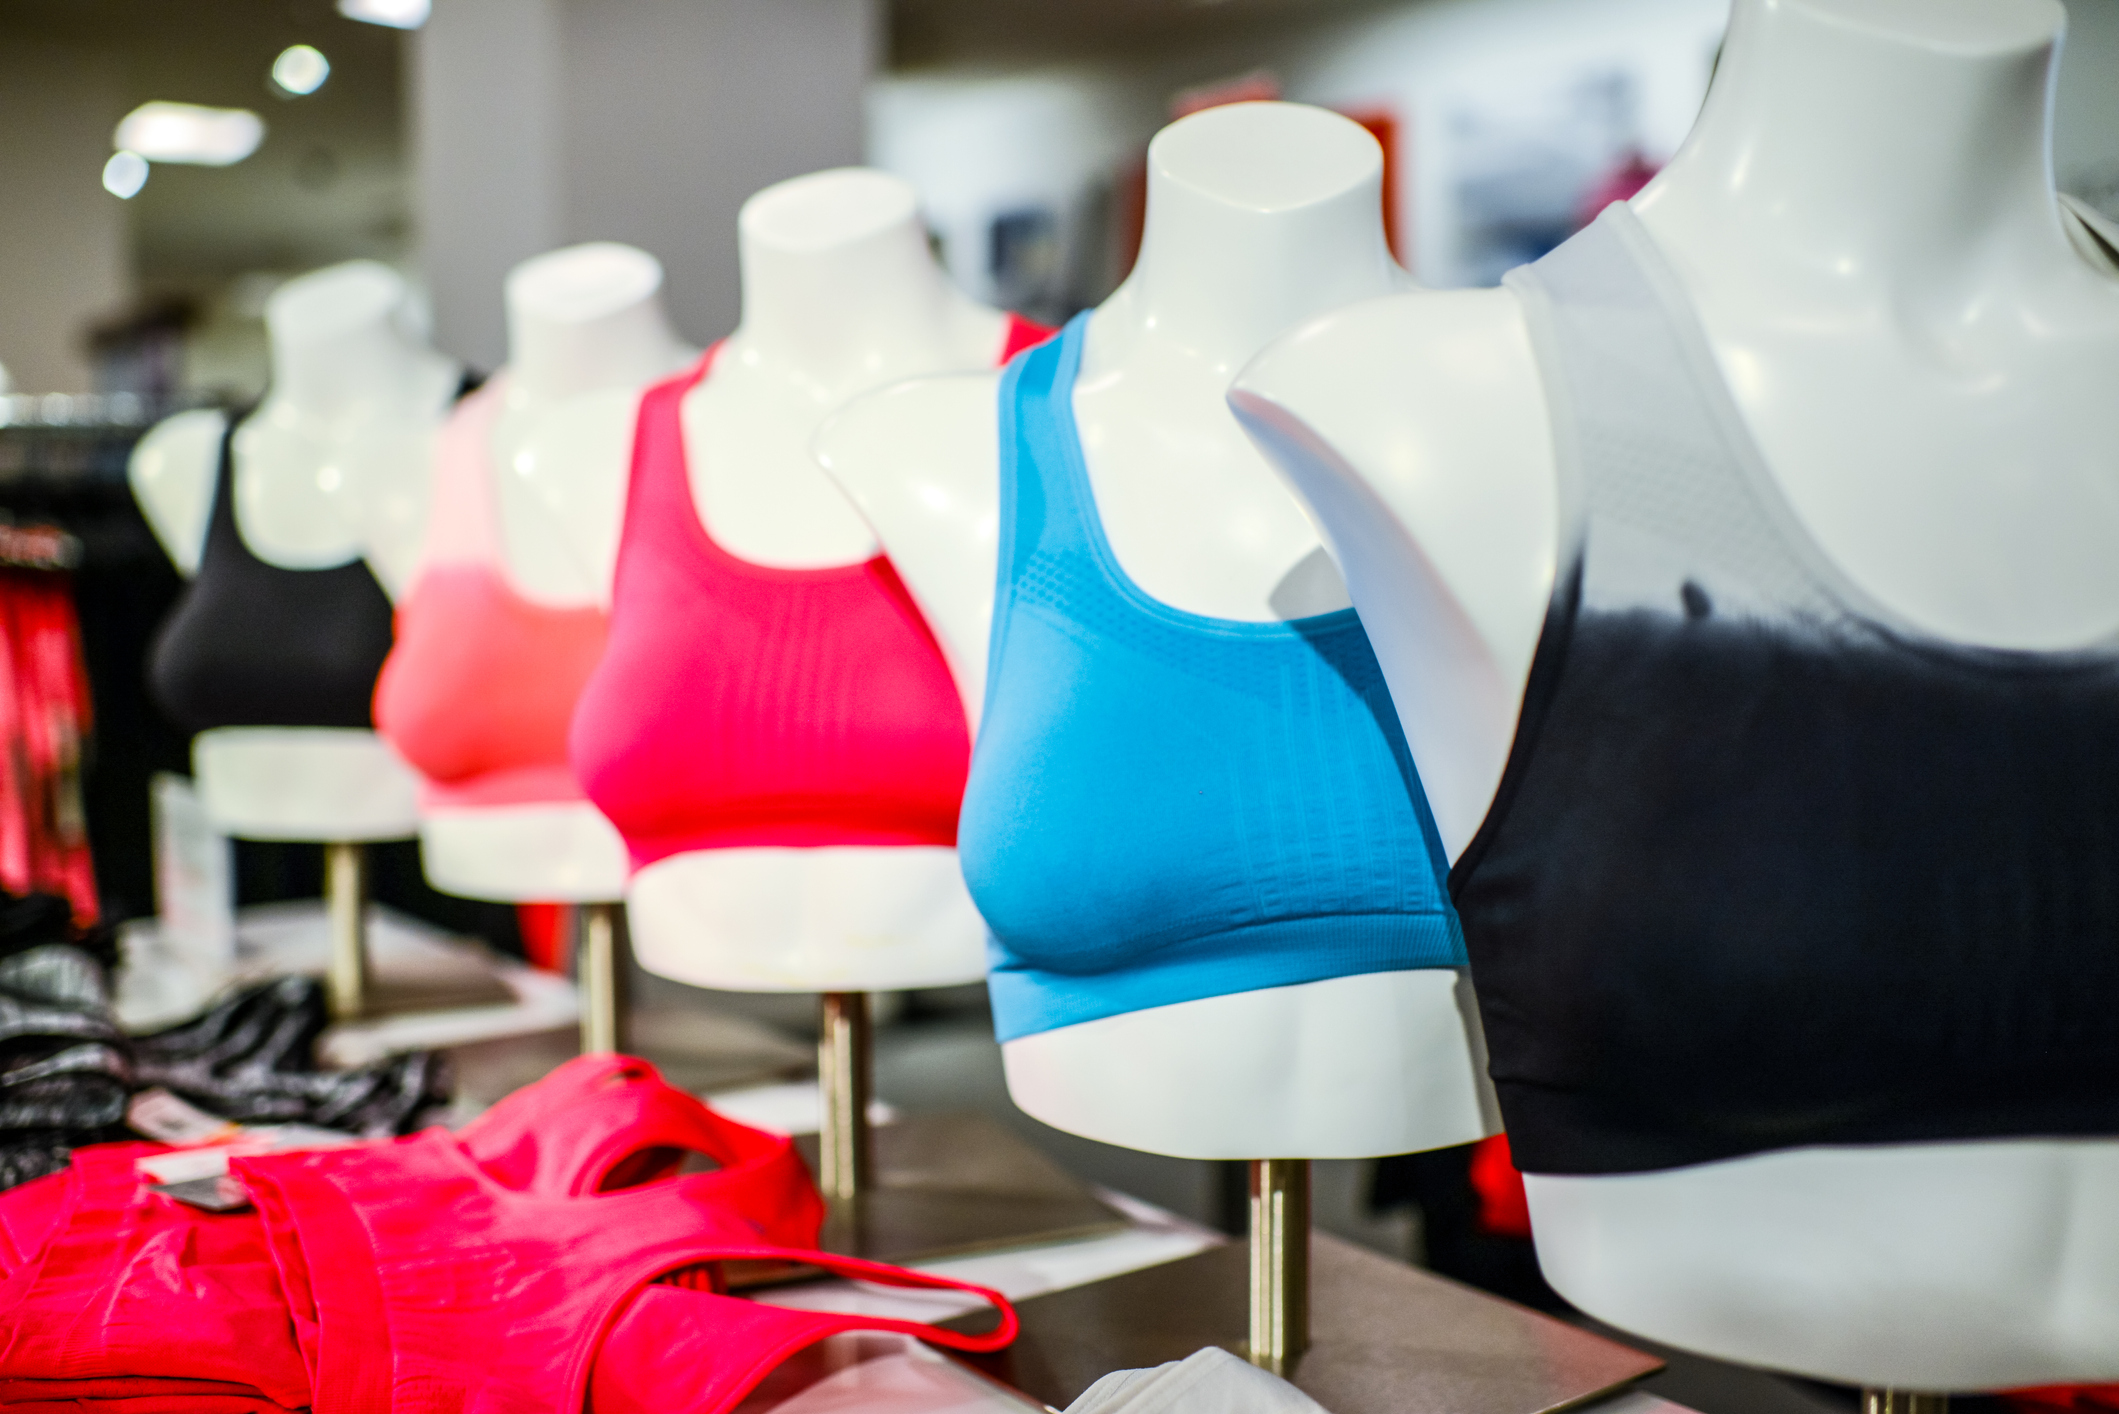 BPA Found in Not Only Sports Bras, But Other Athletic Wear